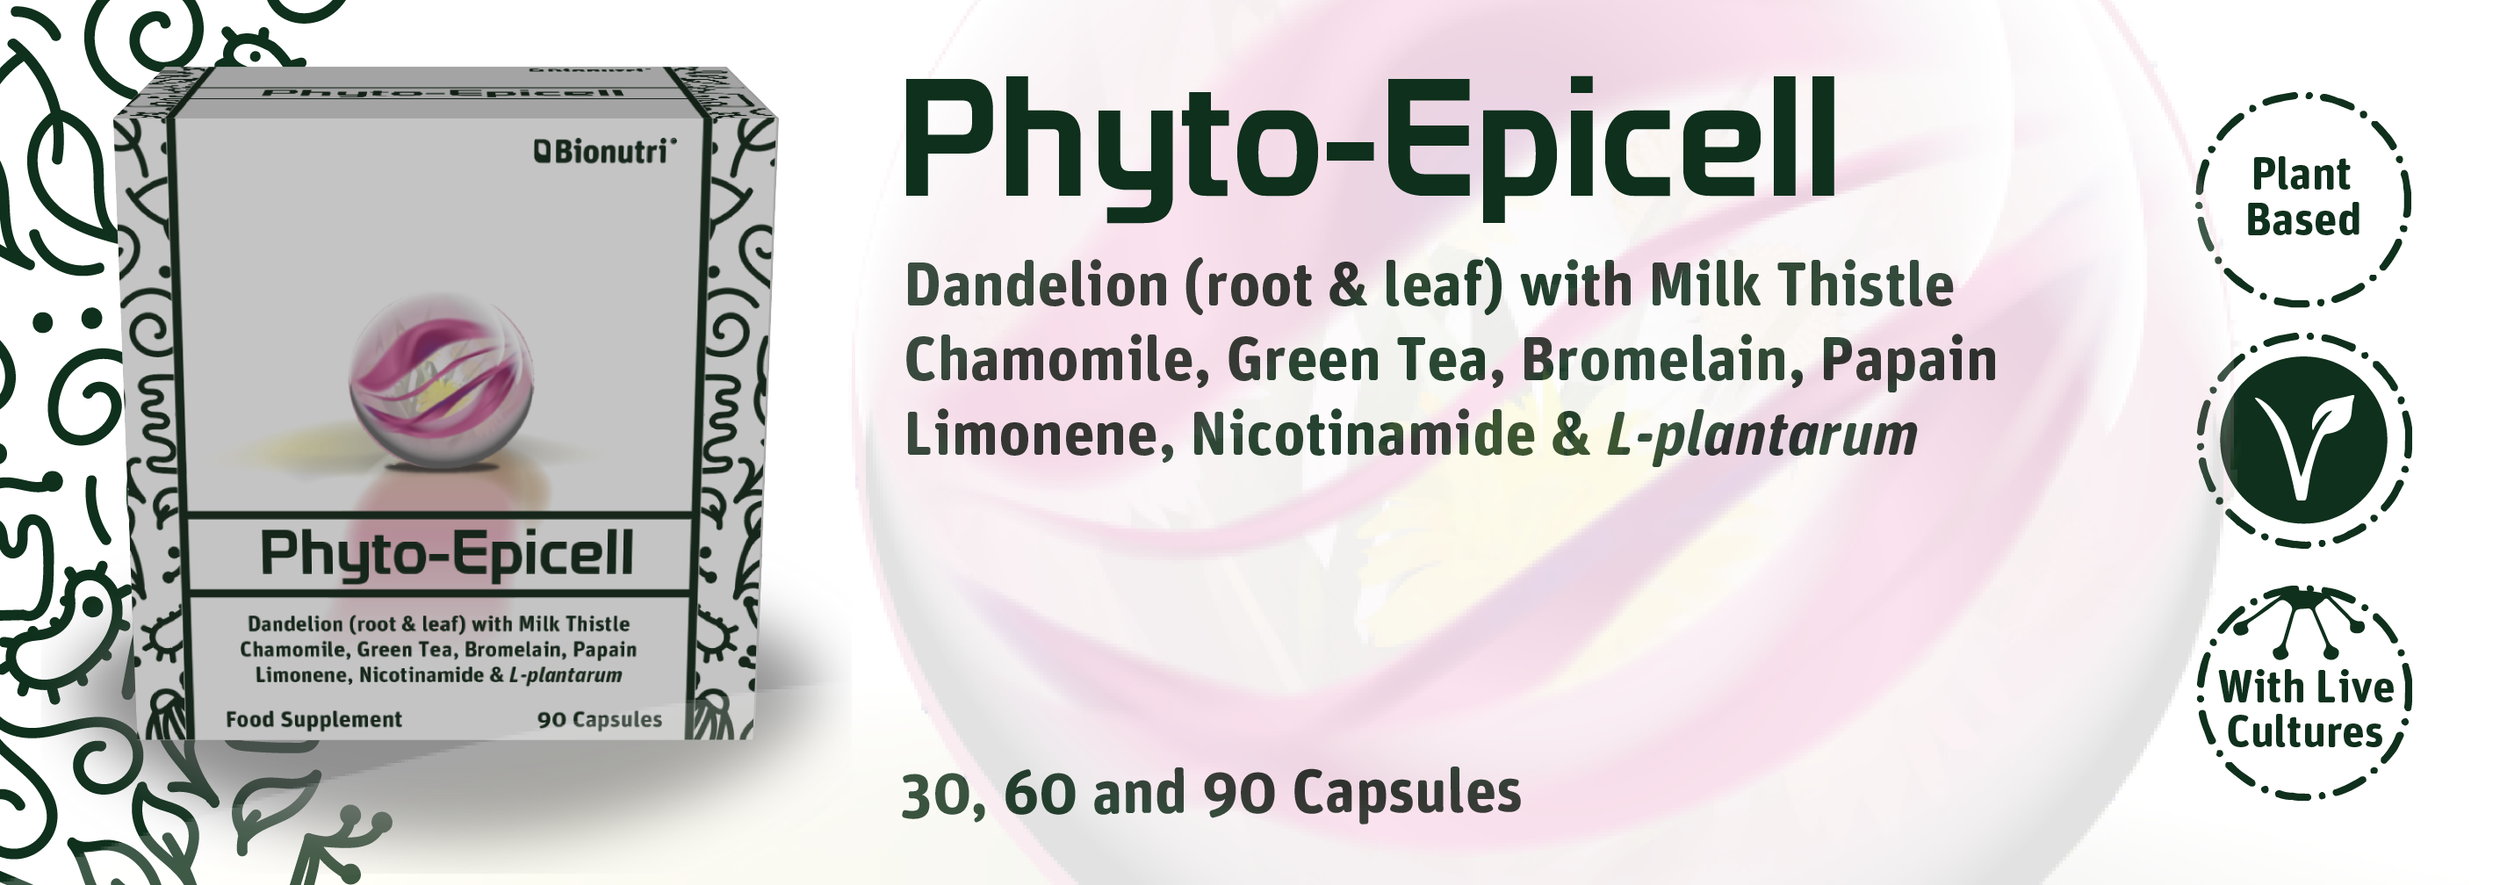 Phyto Epicell 23-01.png